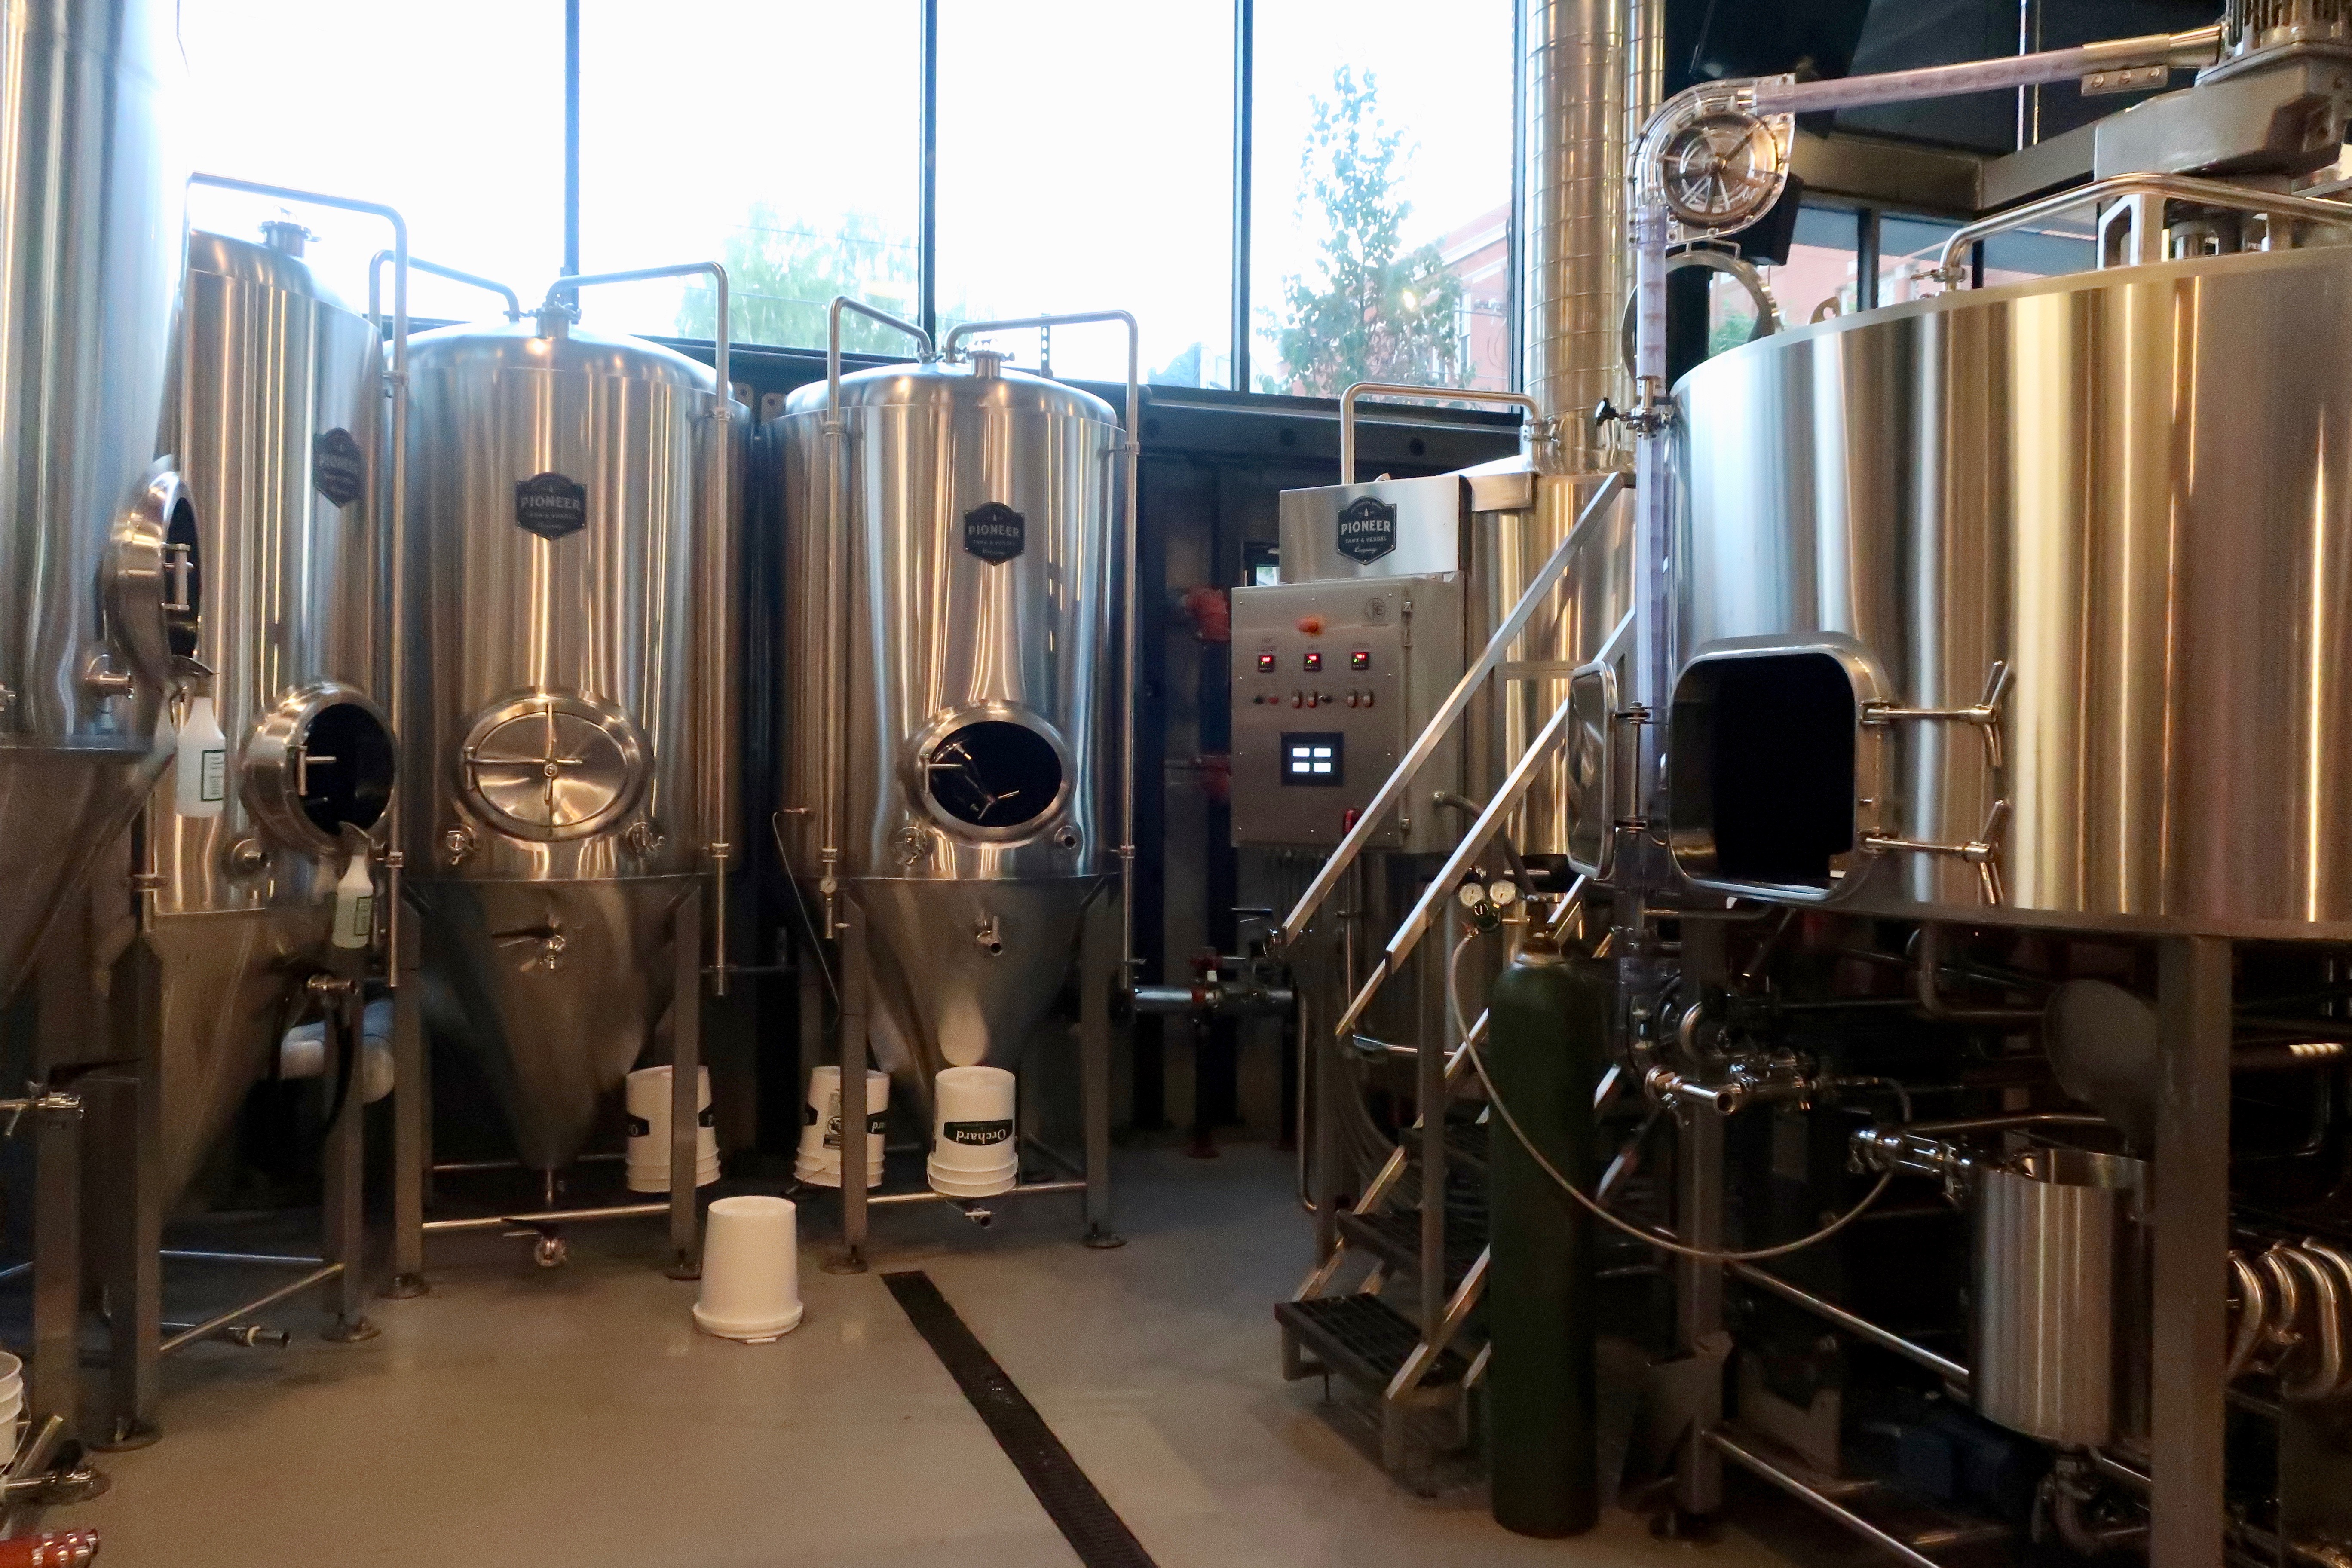 Peeking into the 15-barrel brewhouse from the dinning area at West Coast Grocery Co..